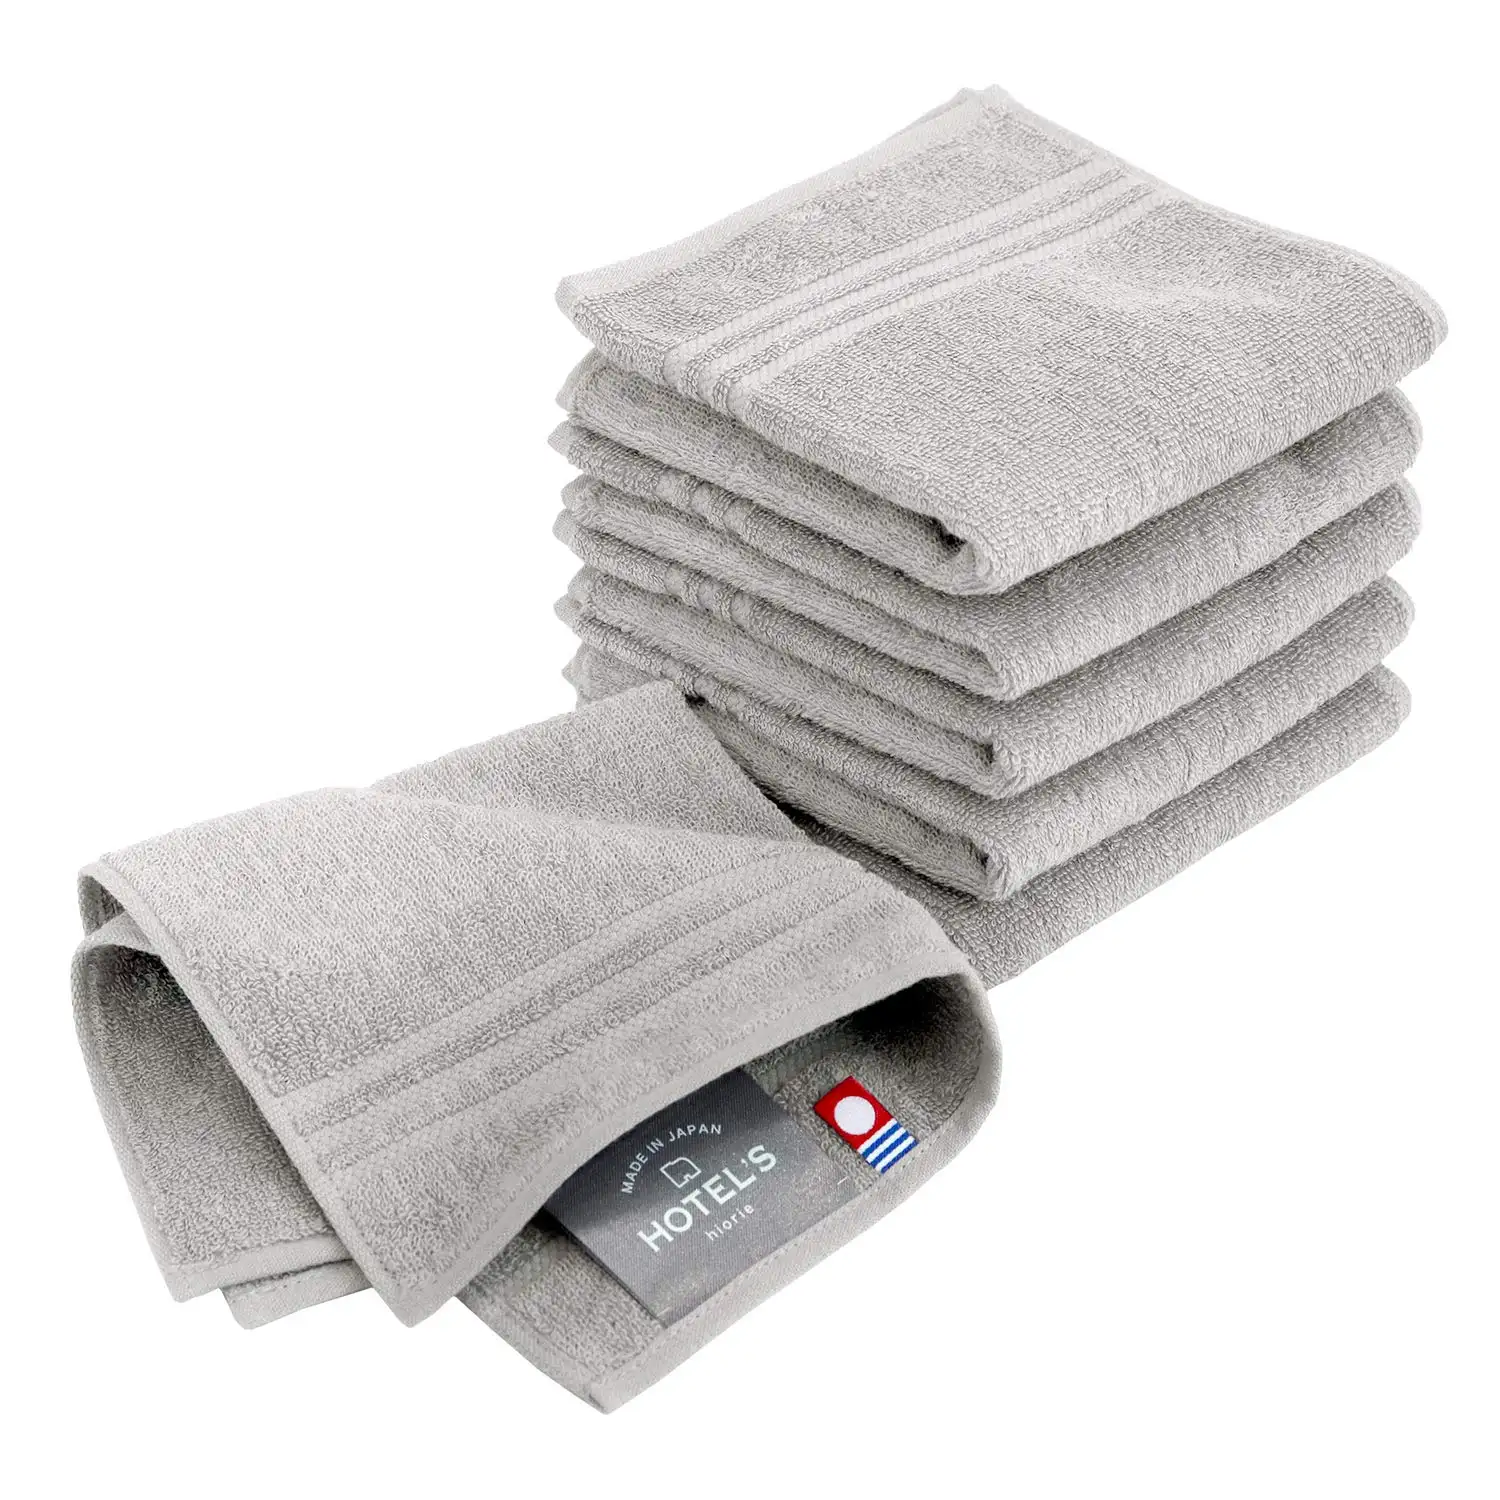 [Wholesale Products] HIORIE Imabari towel Cotton 100% HOTEL'S Handkerchief 25*25cm 400GSM Washcloths Soft Low MOQ Luxury Grey